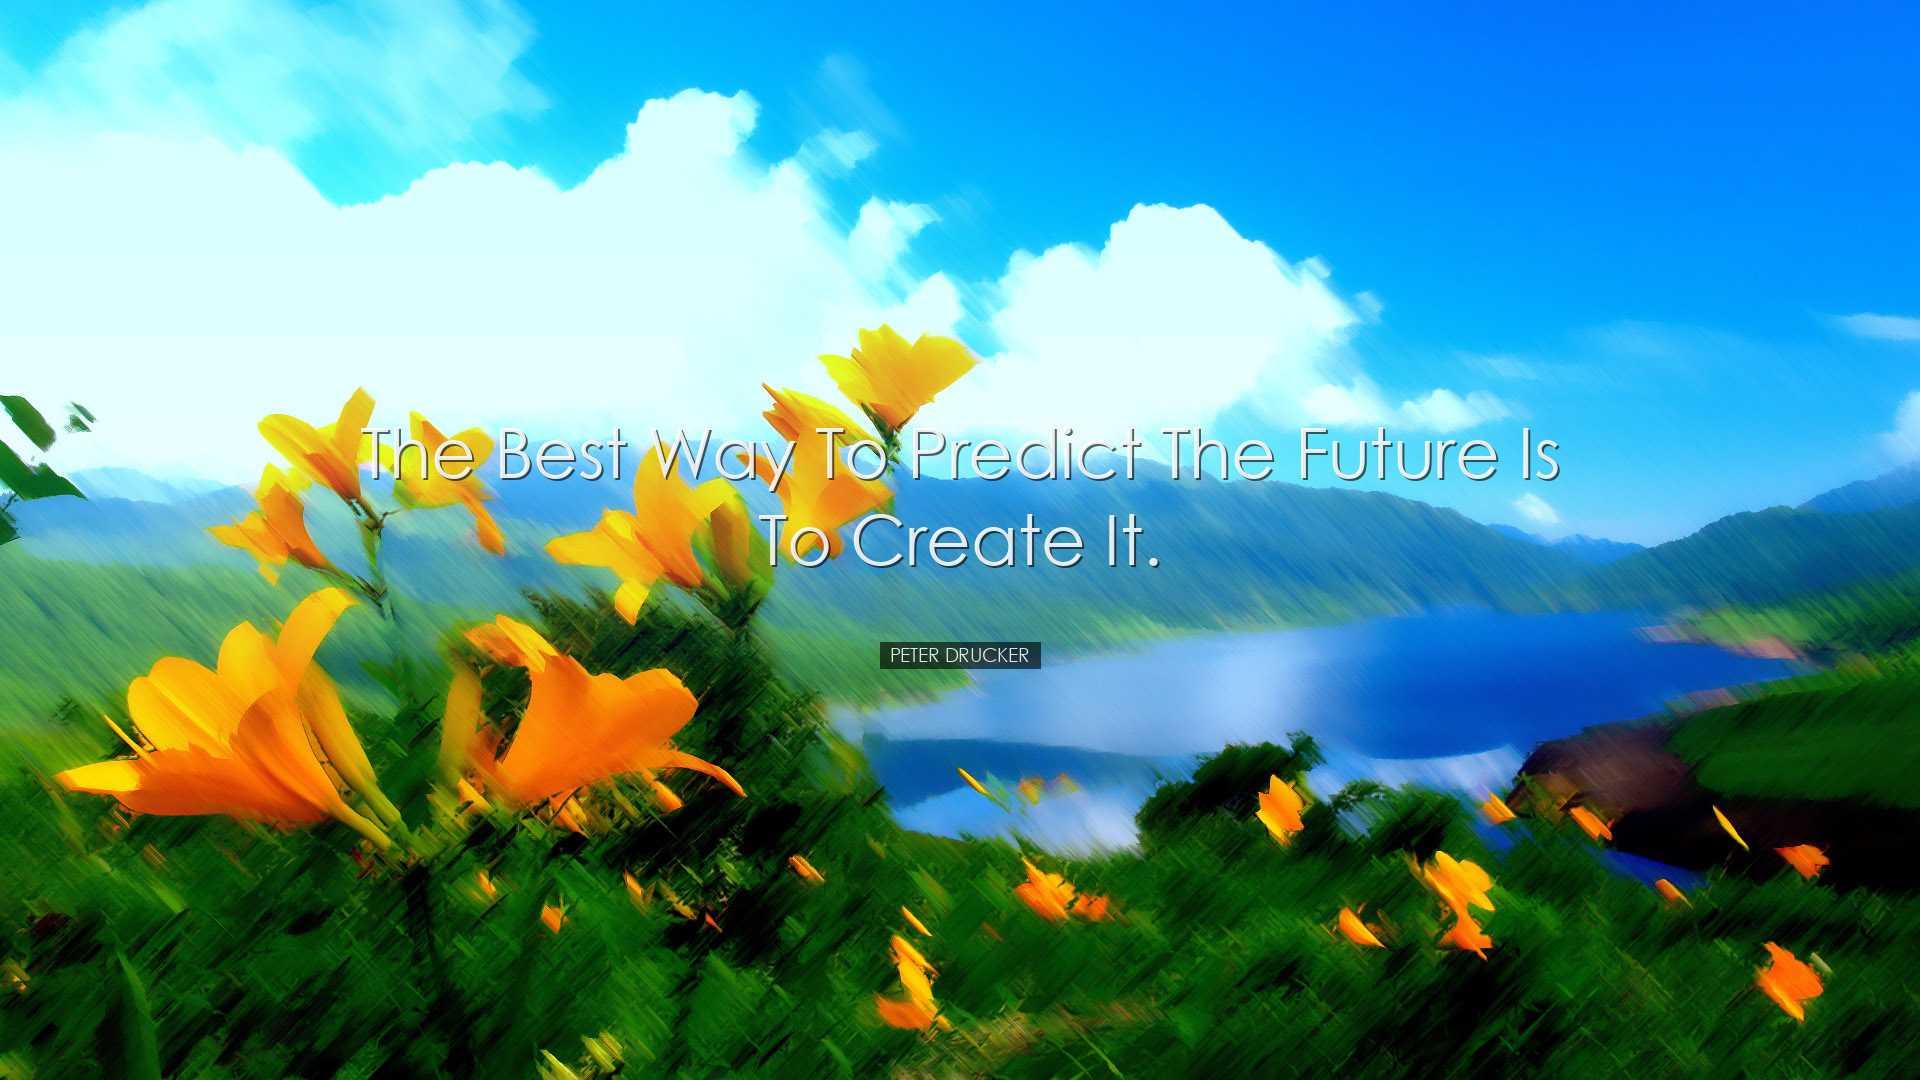 The best way to predict the future is to create it. - Peter Drucke